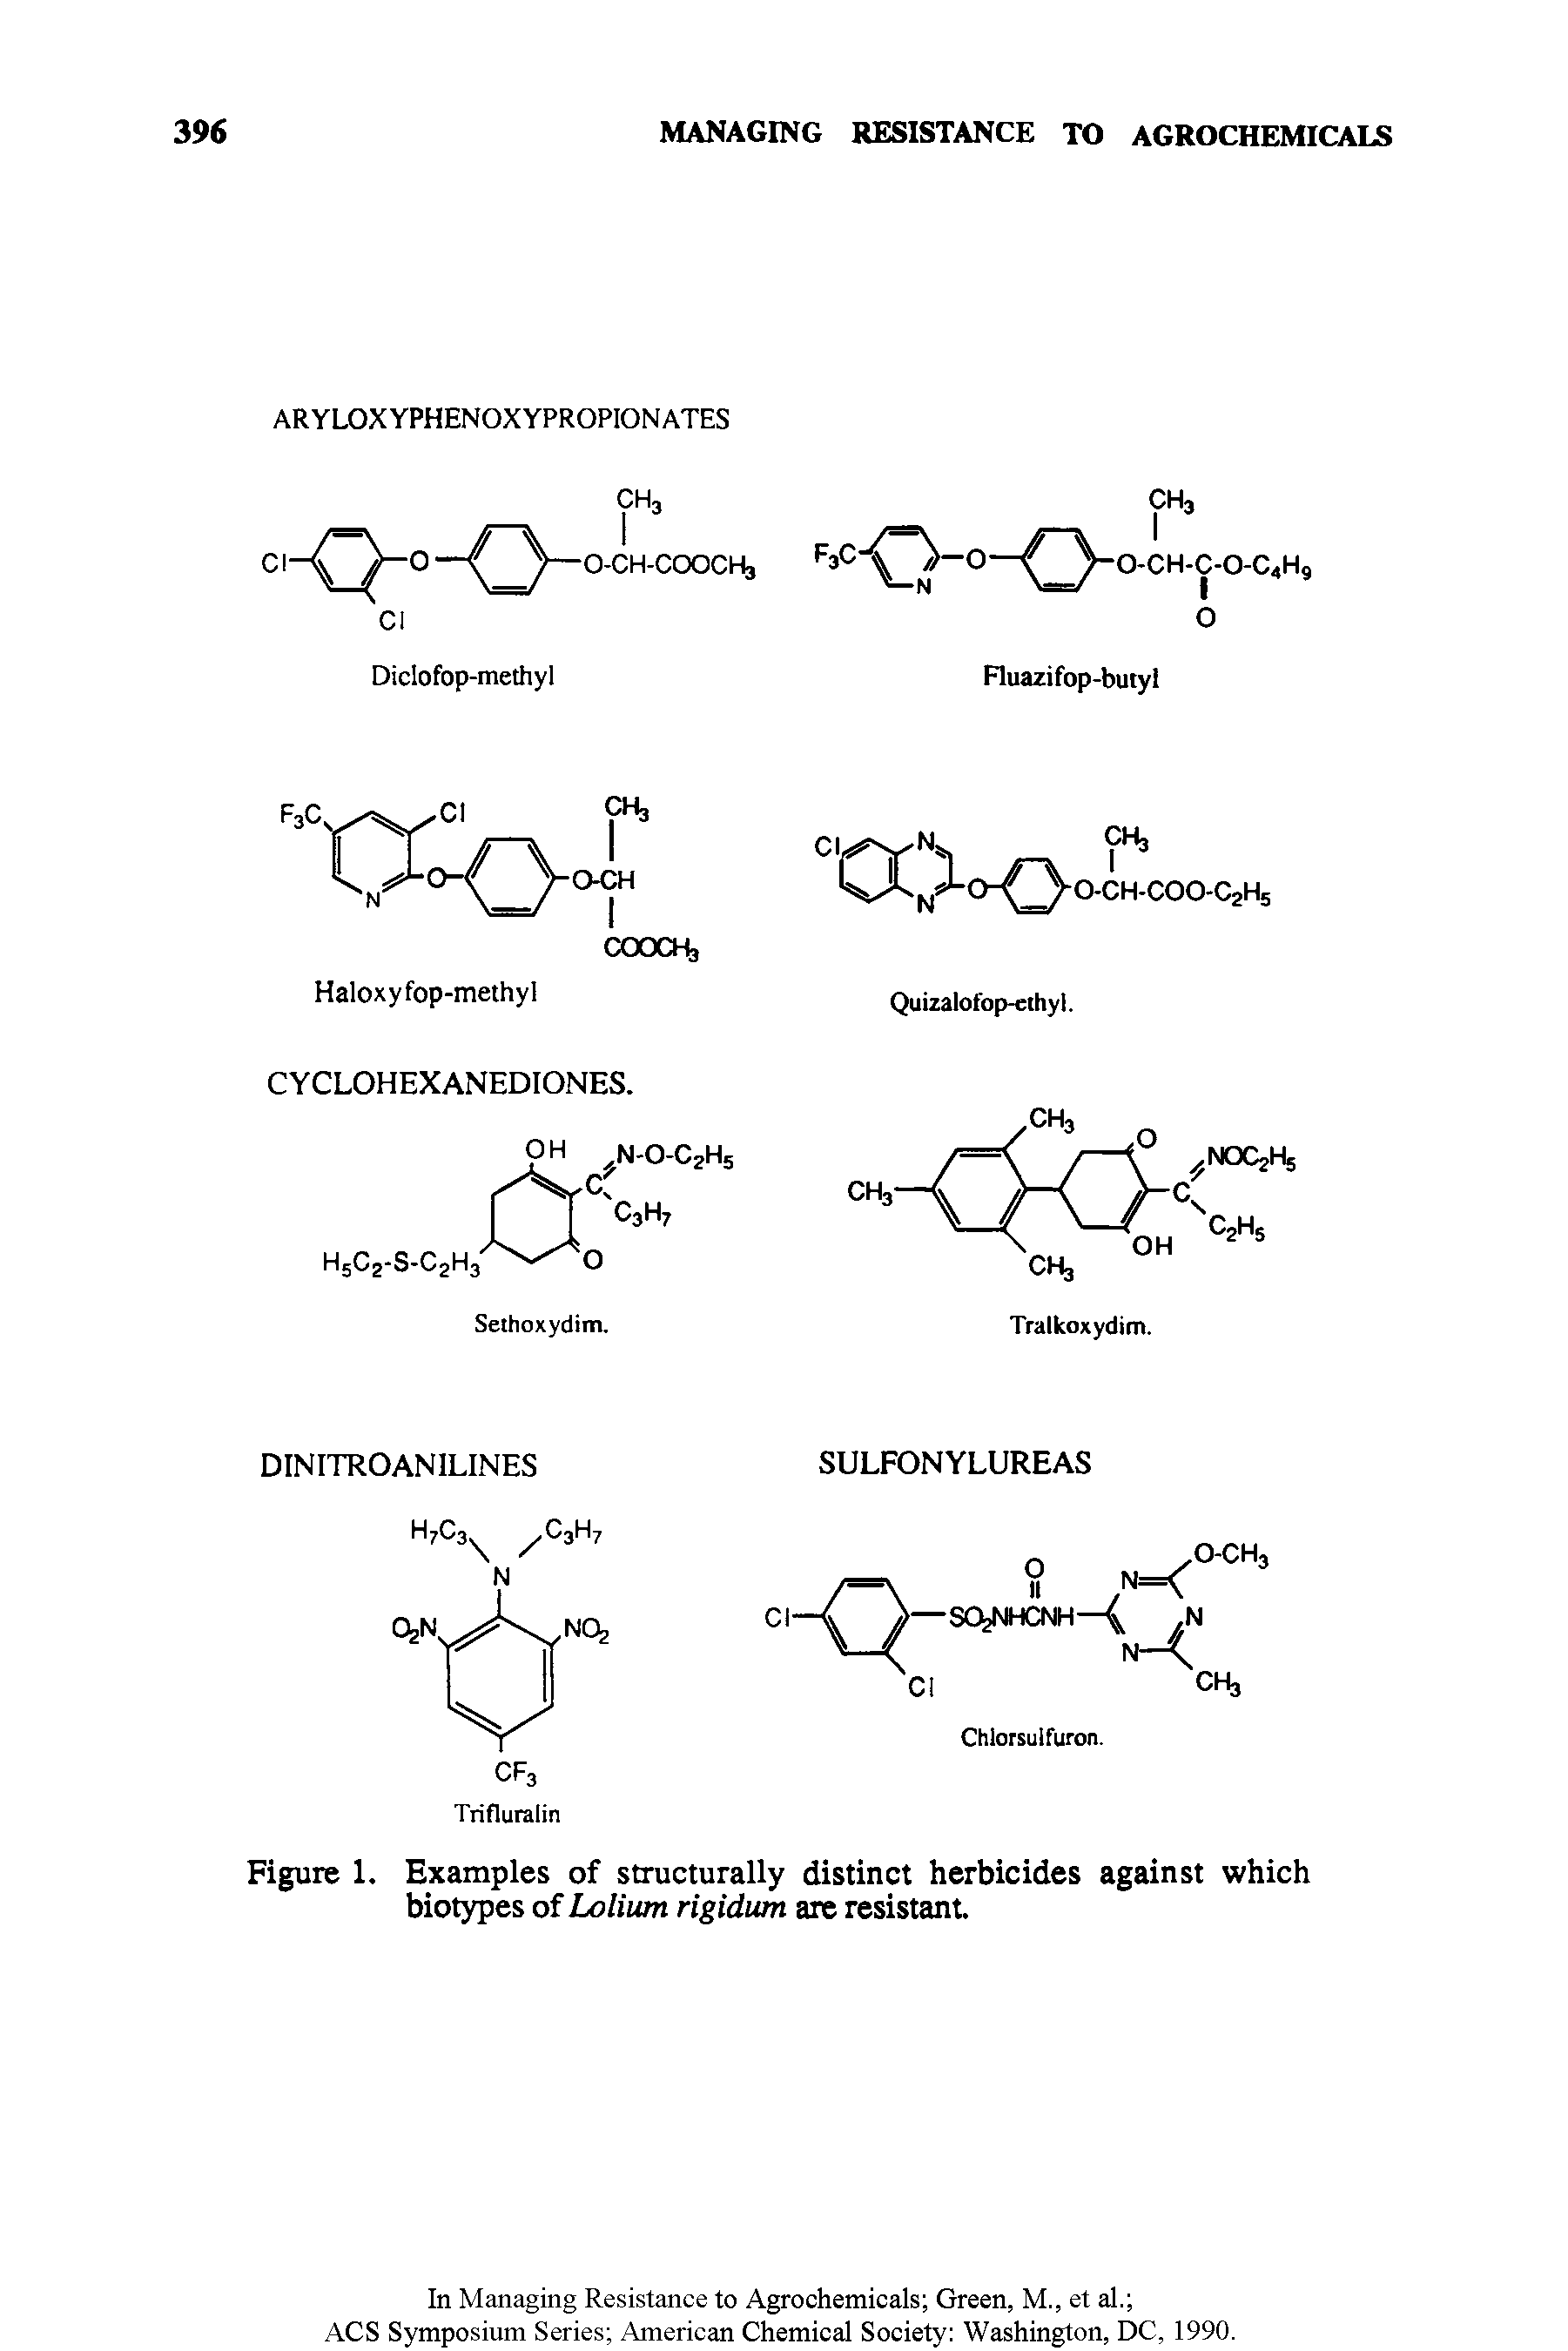 Figure 1. Examples of structurally distinct herbicides against which biotypes of Lolium rigidum are resistant.